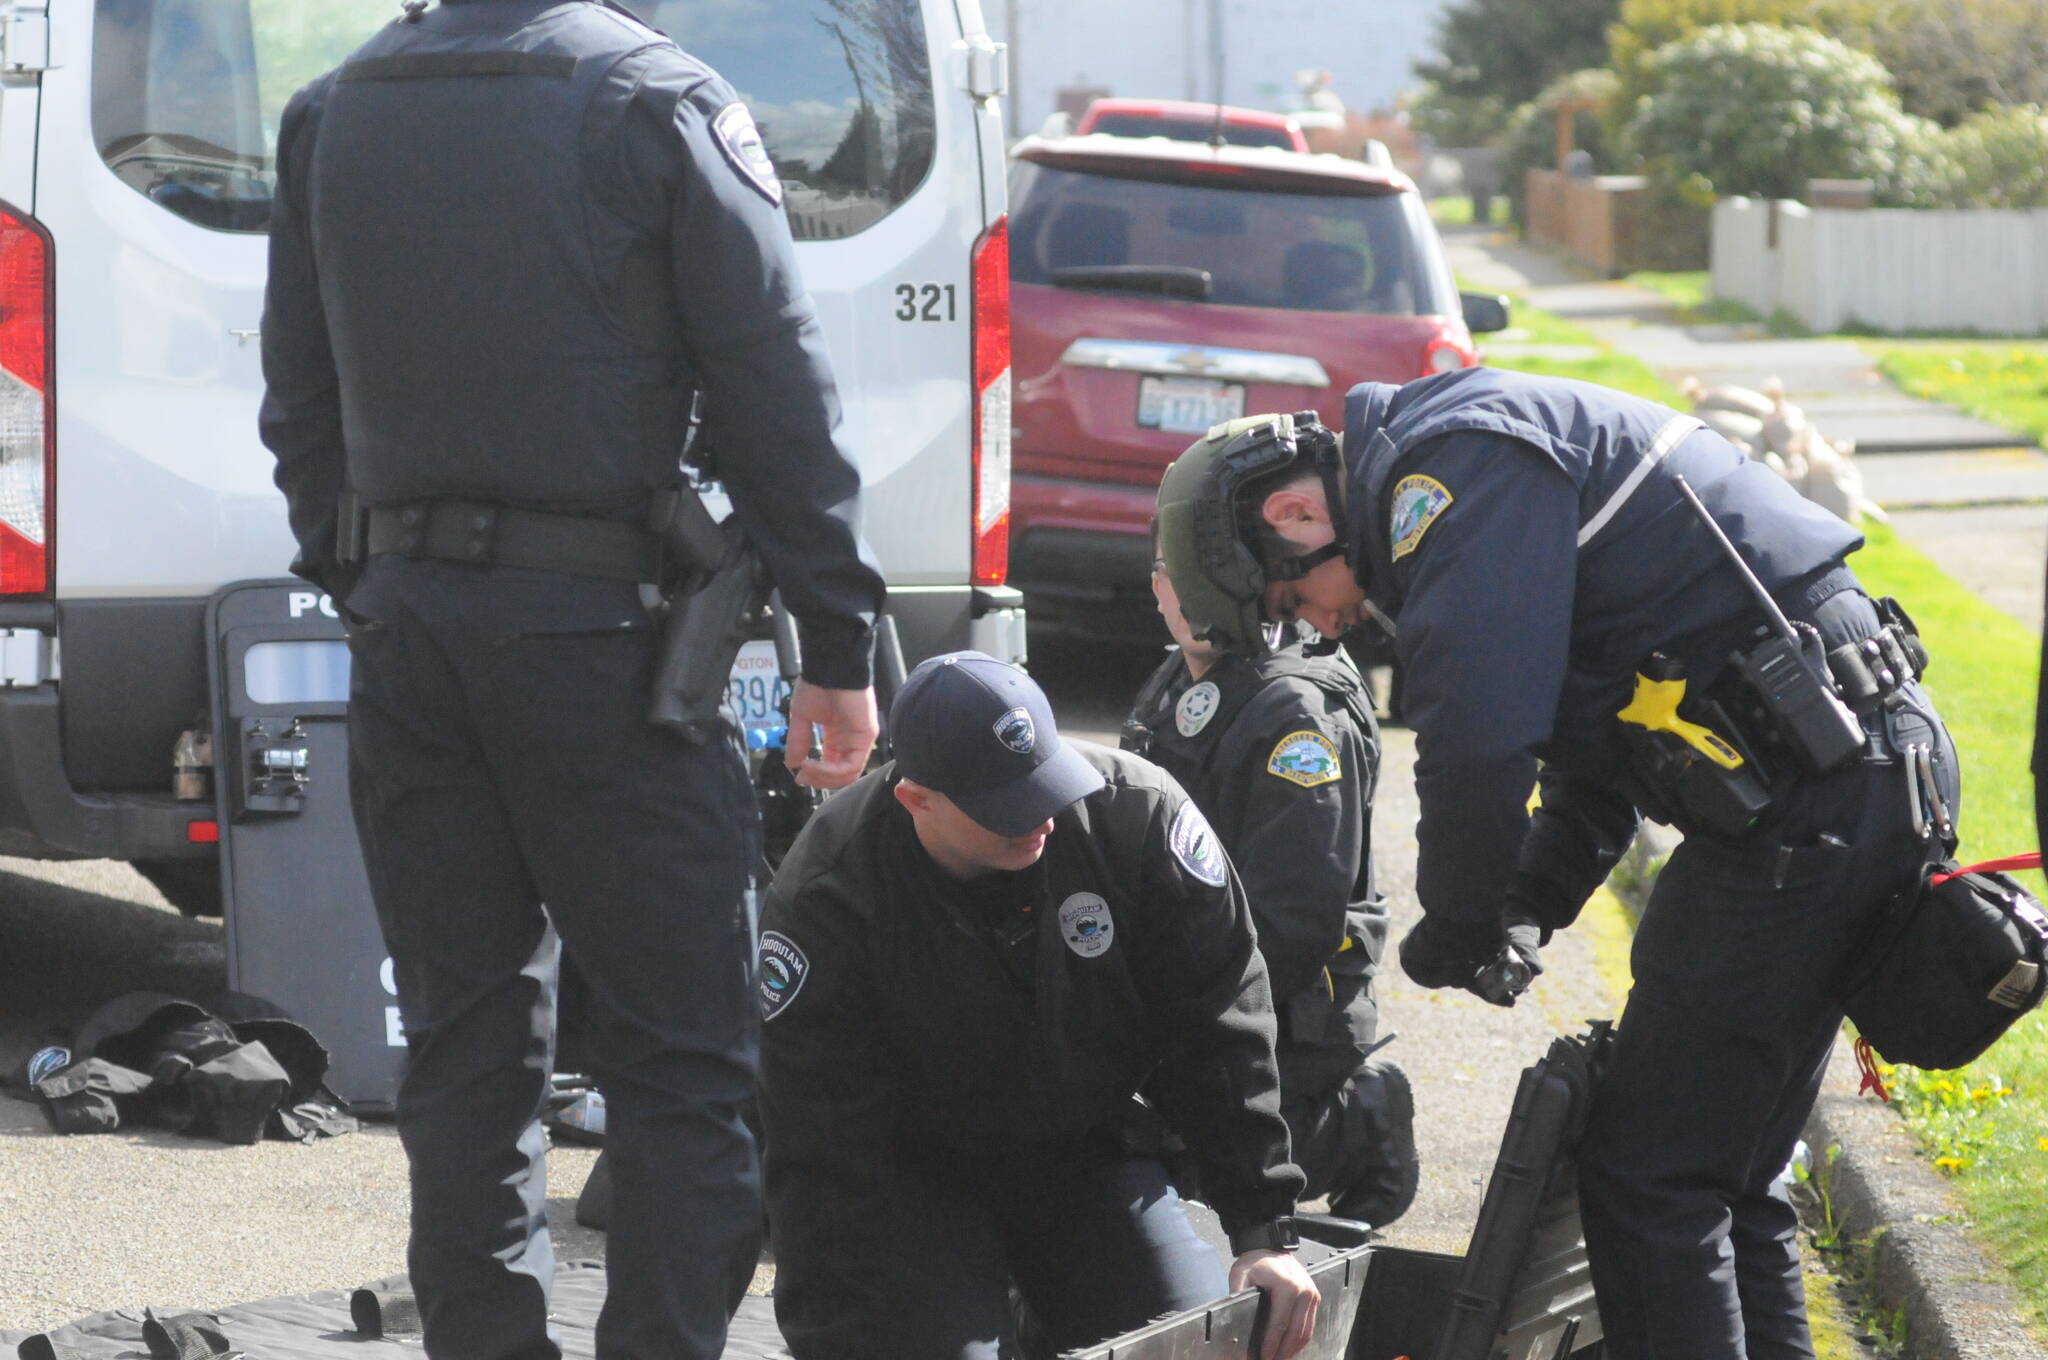 Hoquiam Police Officers start to unload equipment after 19-hour police standoff with juvenile at a residence in the 2700 block of Queets Avenue, which ends peacefully with him surrendering himself to law enforcement. Matthew N. Wells | The Daily World